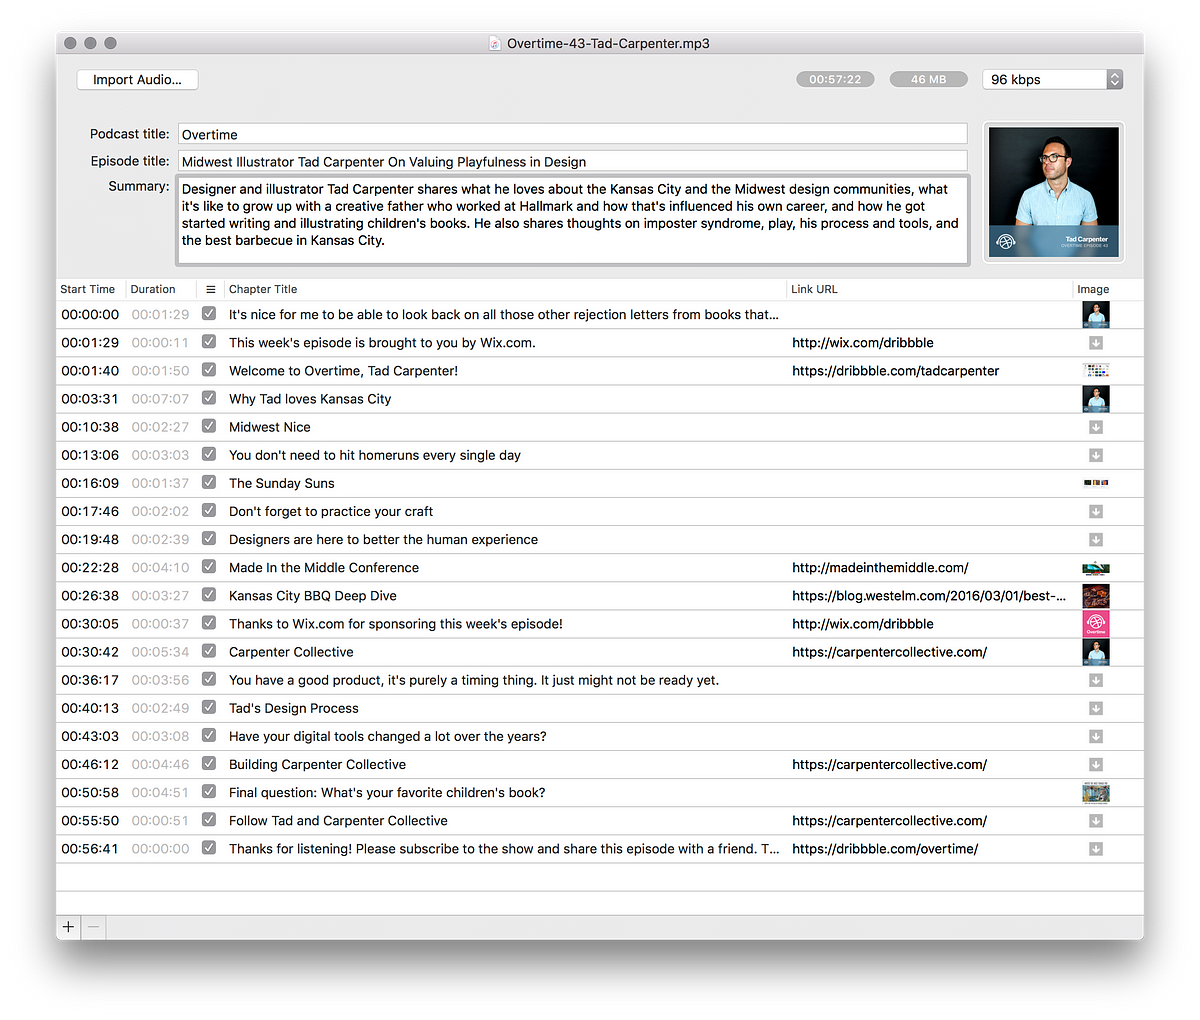 Podcast Chapters — The best way to add MP3 chapter markers to your podcast.